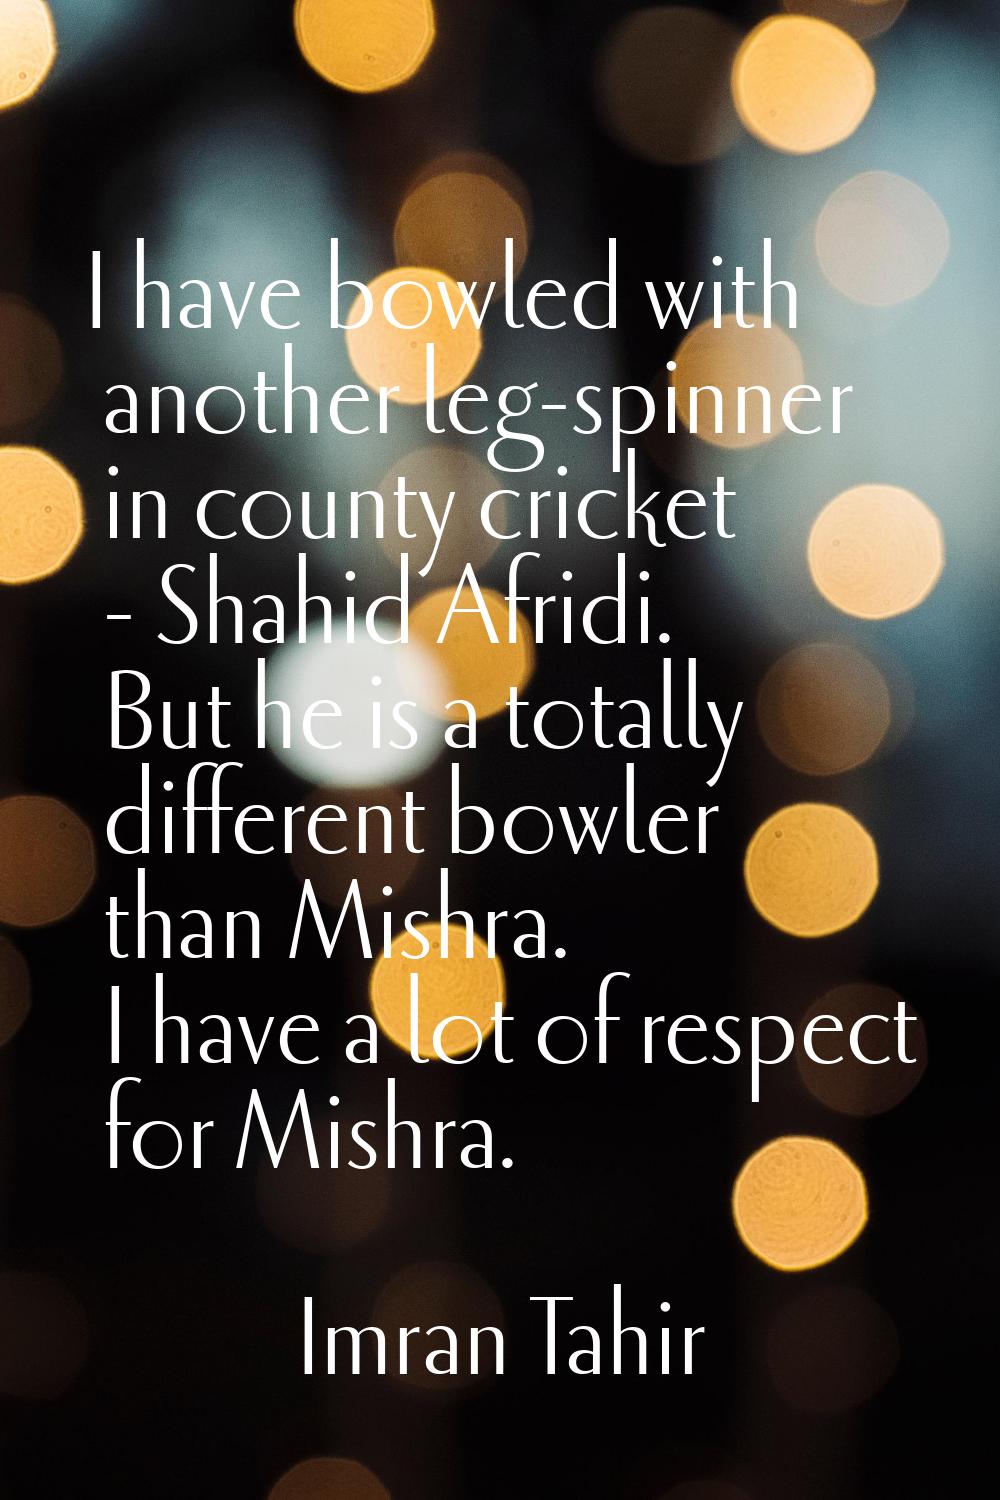 I have bowled with another leg-spinner in county cricket - Shahid Afridi. But he is a totally diffe